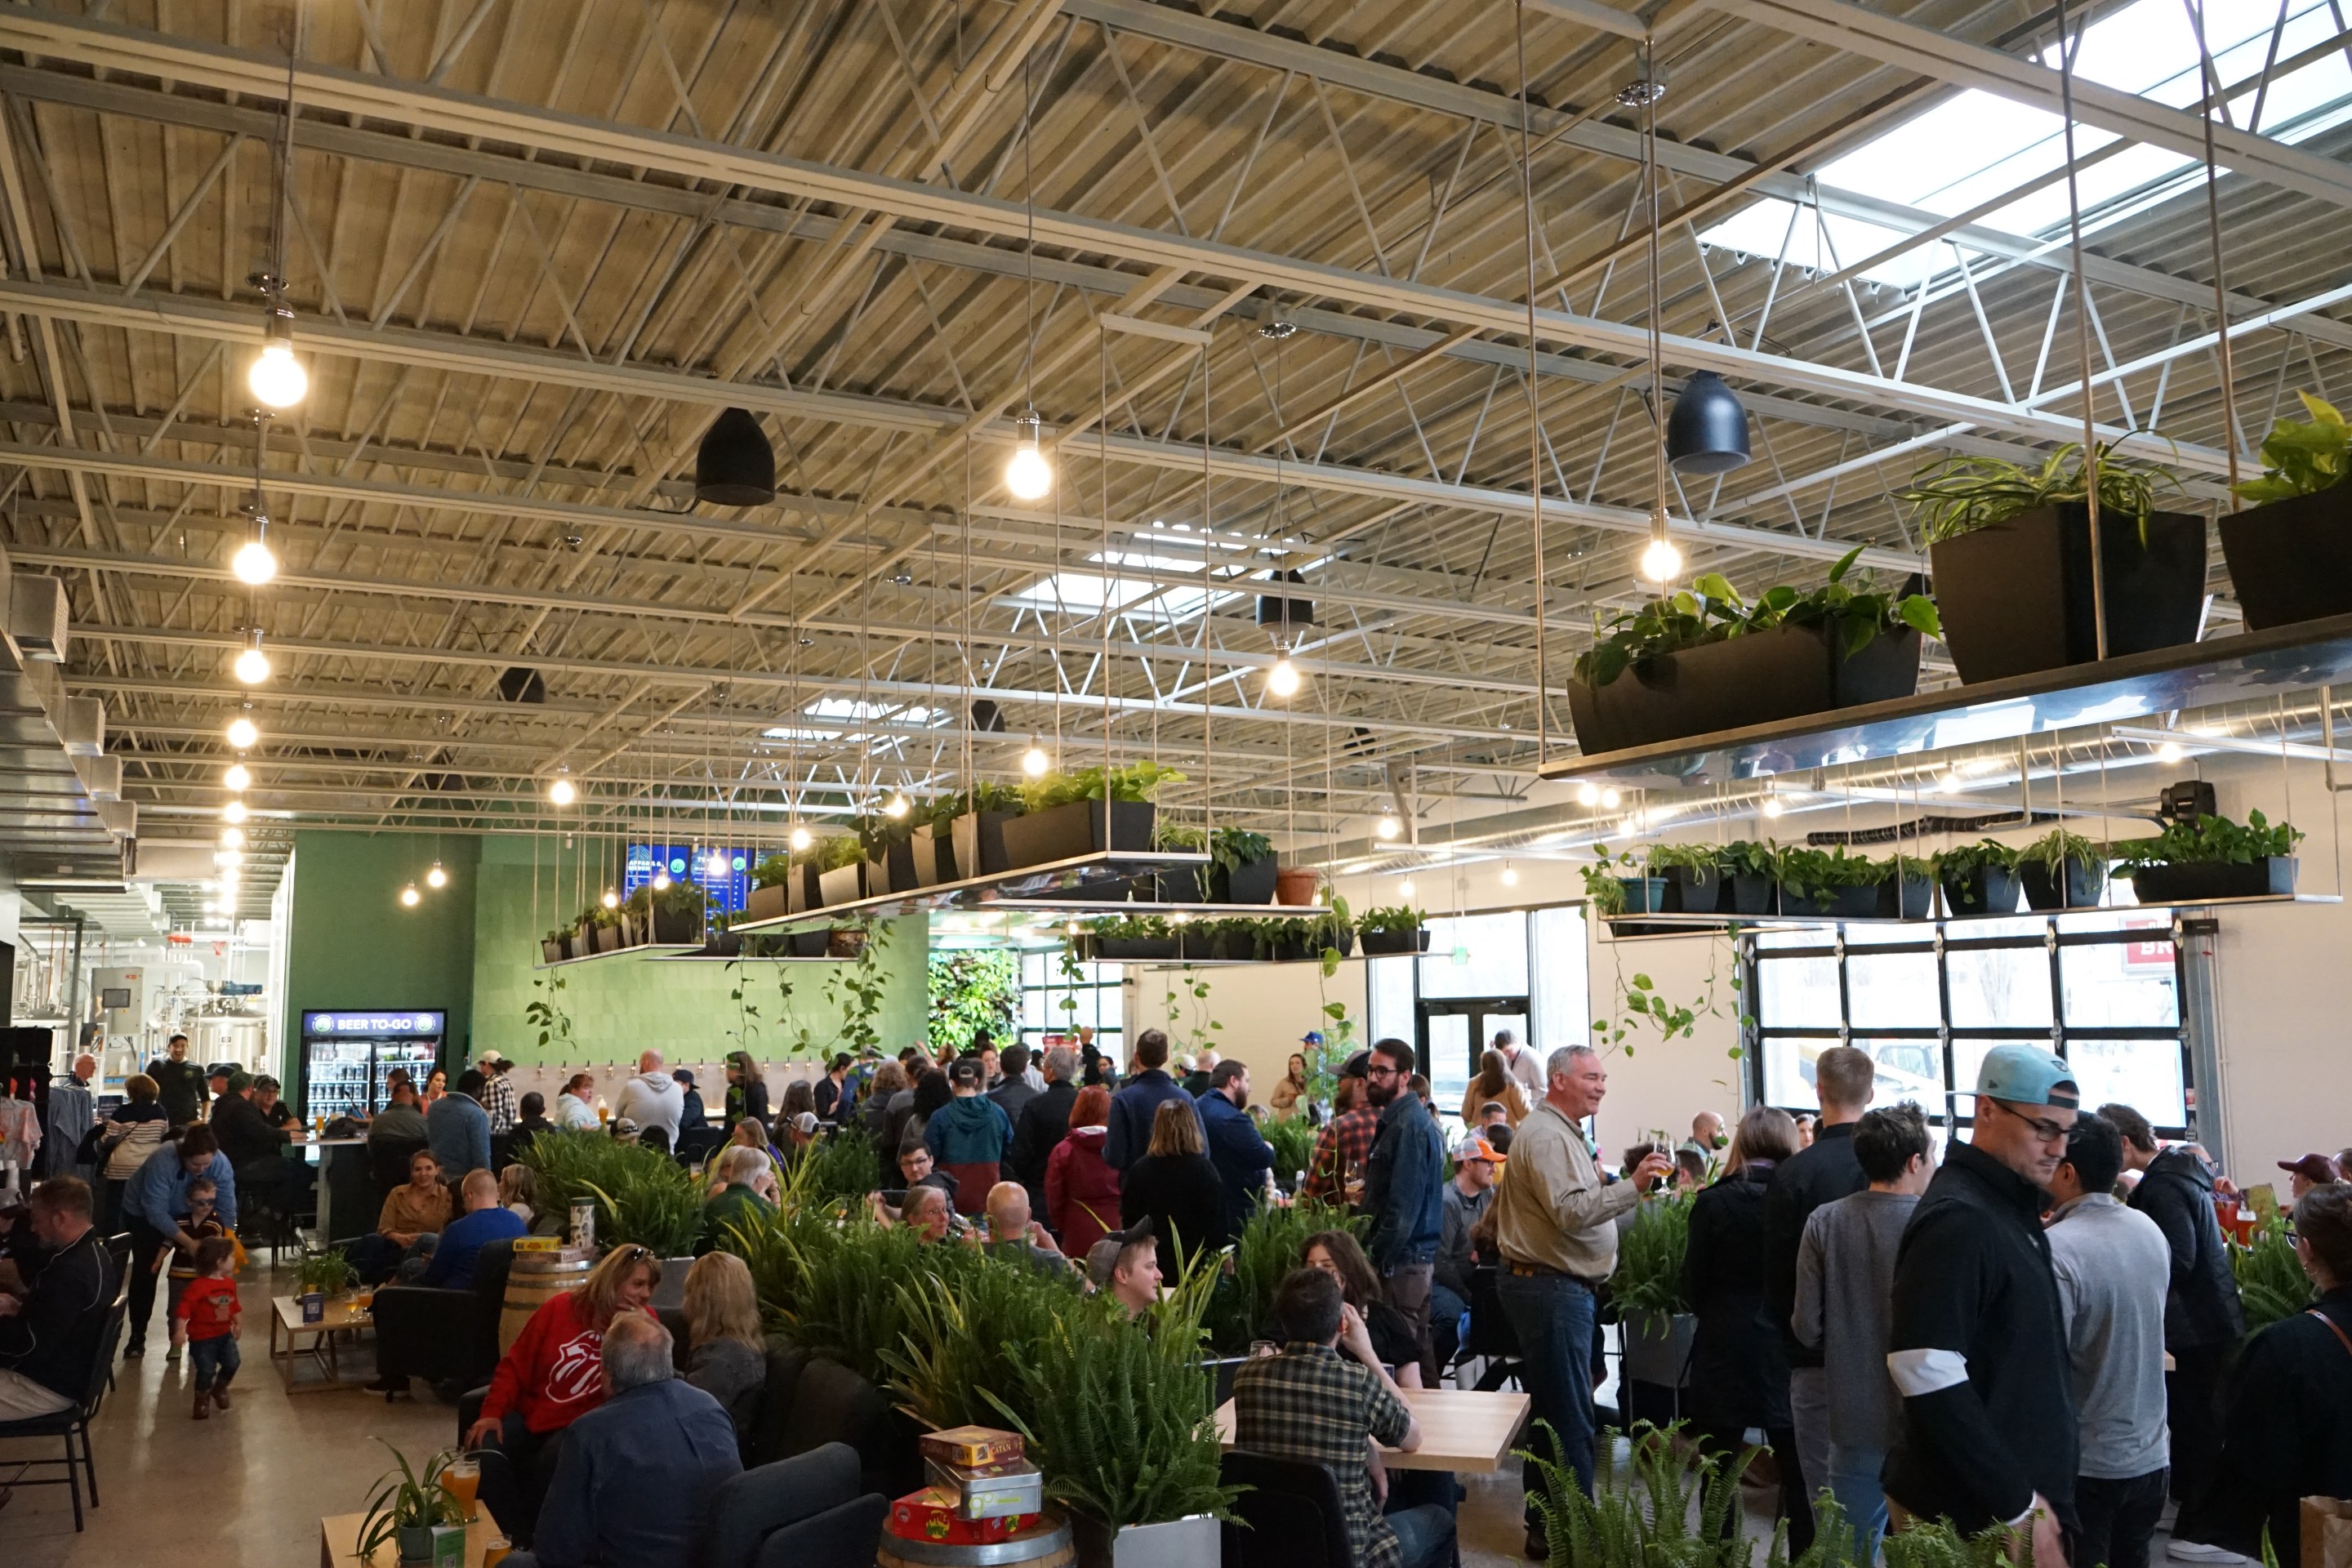 A taproom full of people and plants, which line the walkways and hang down from the ceiling